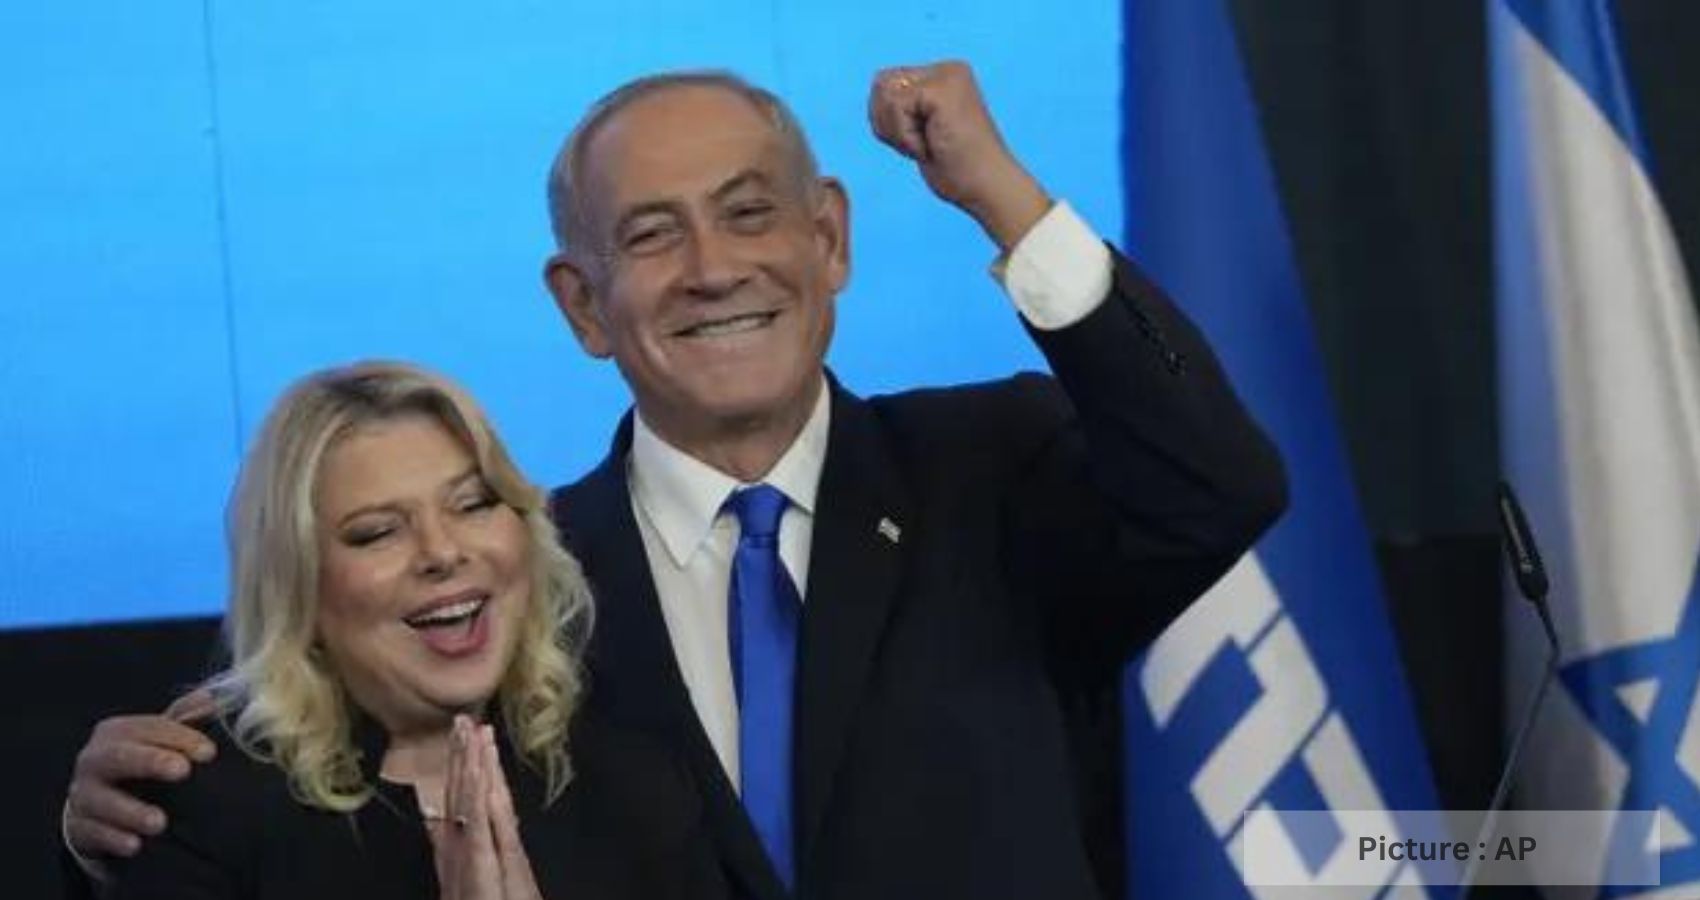 Netanyahu To Form Government In Israel With Far Right Support